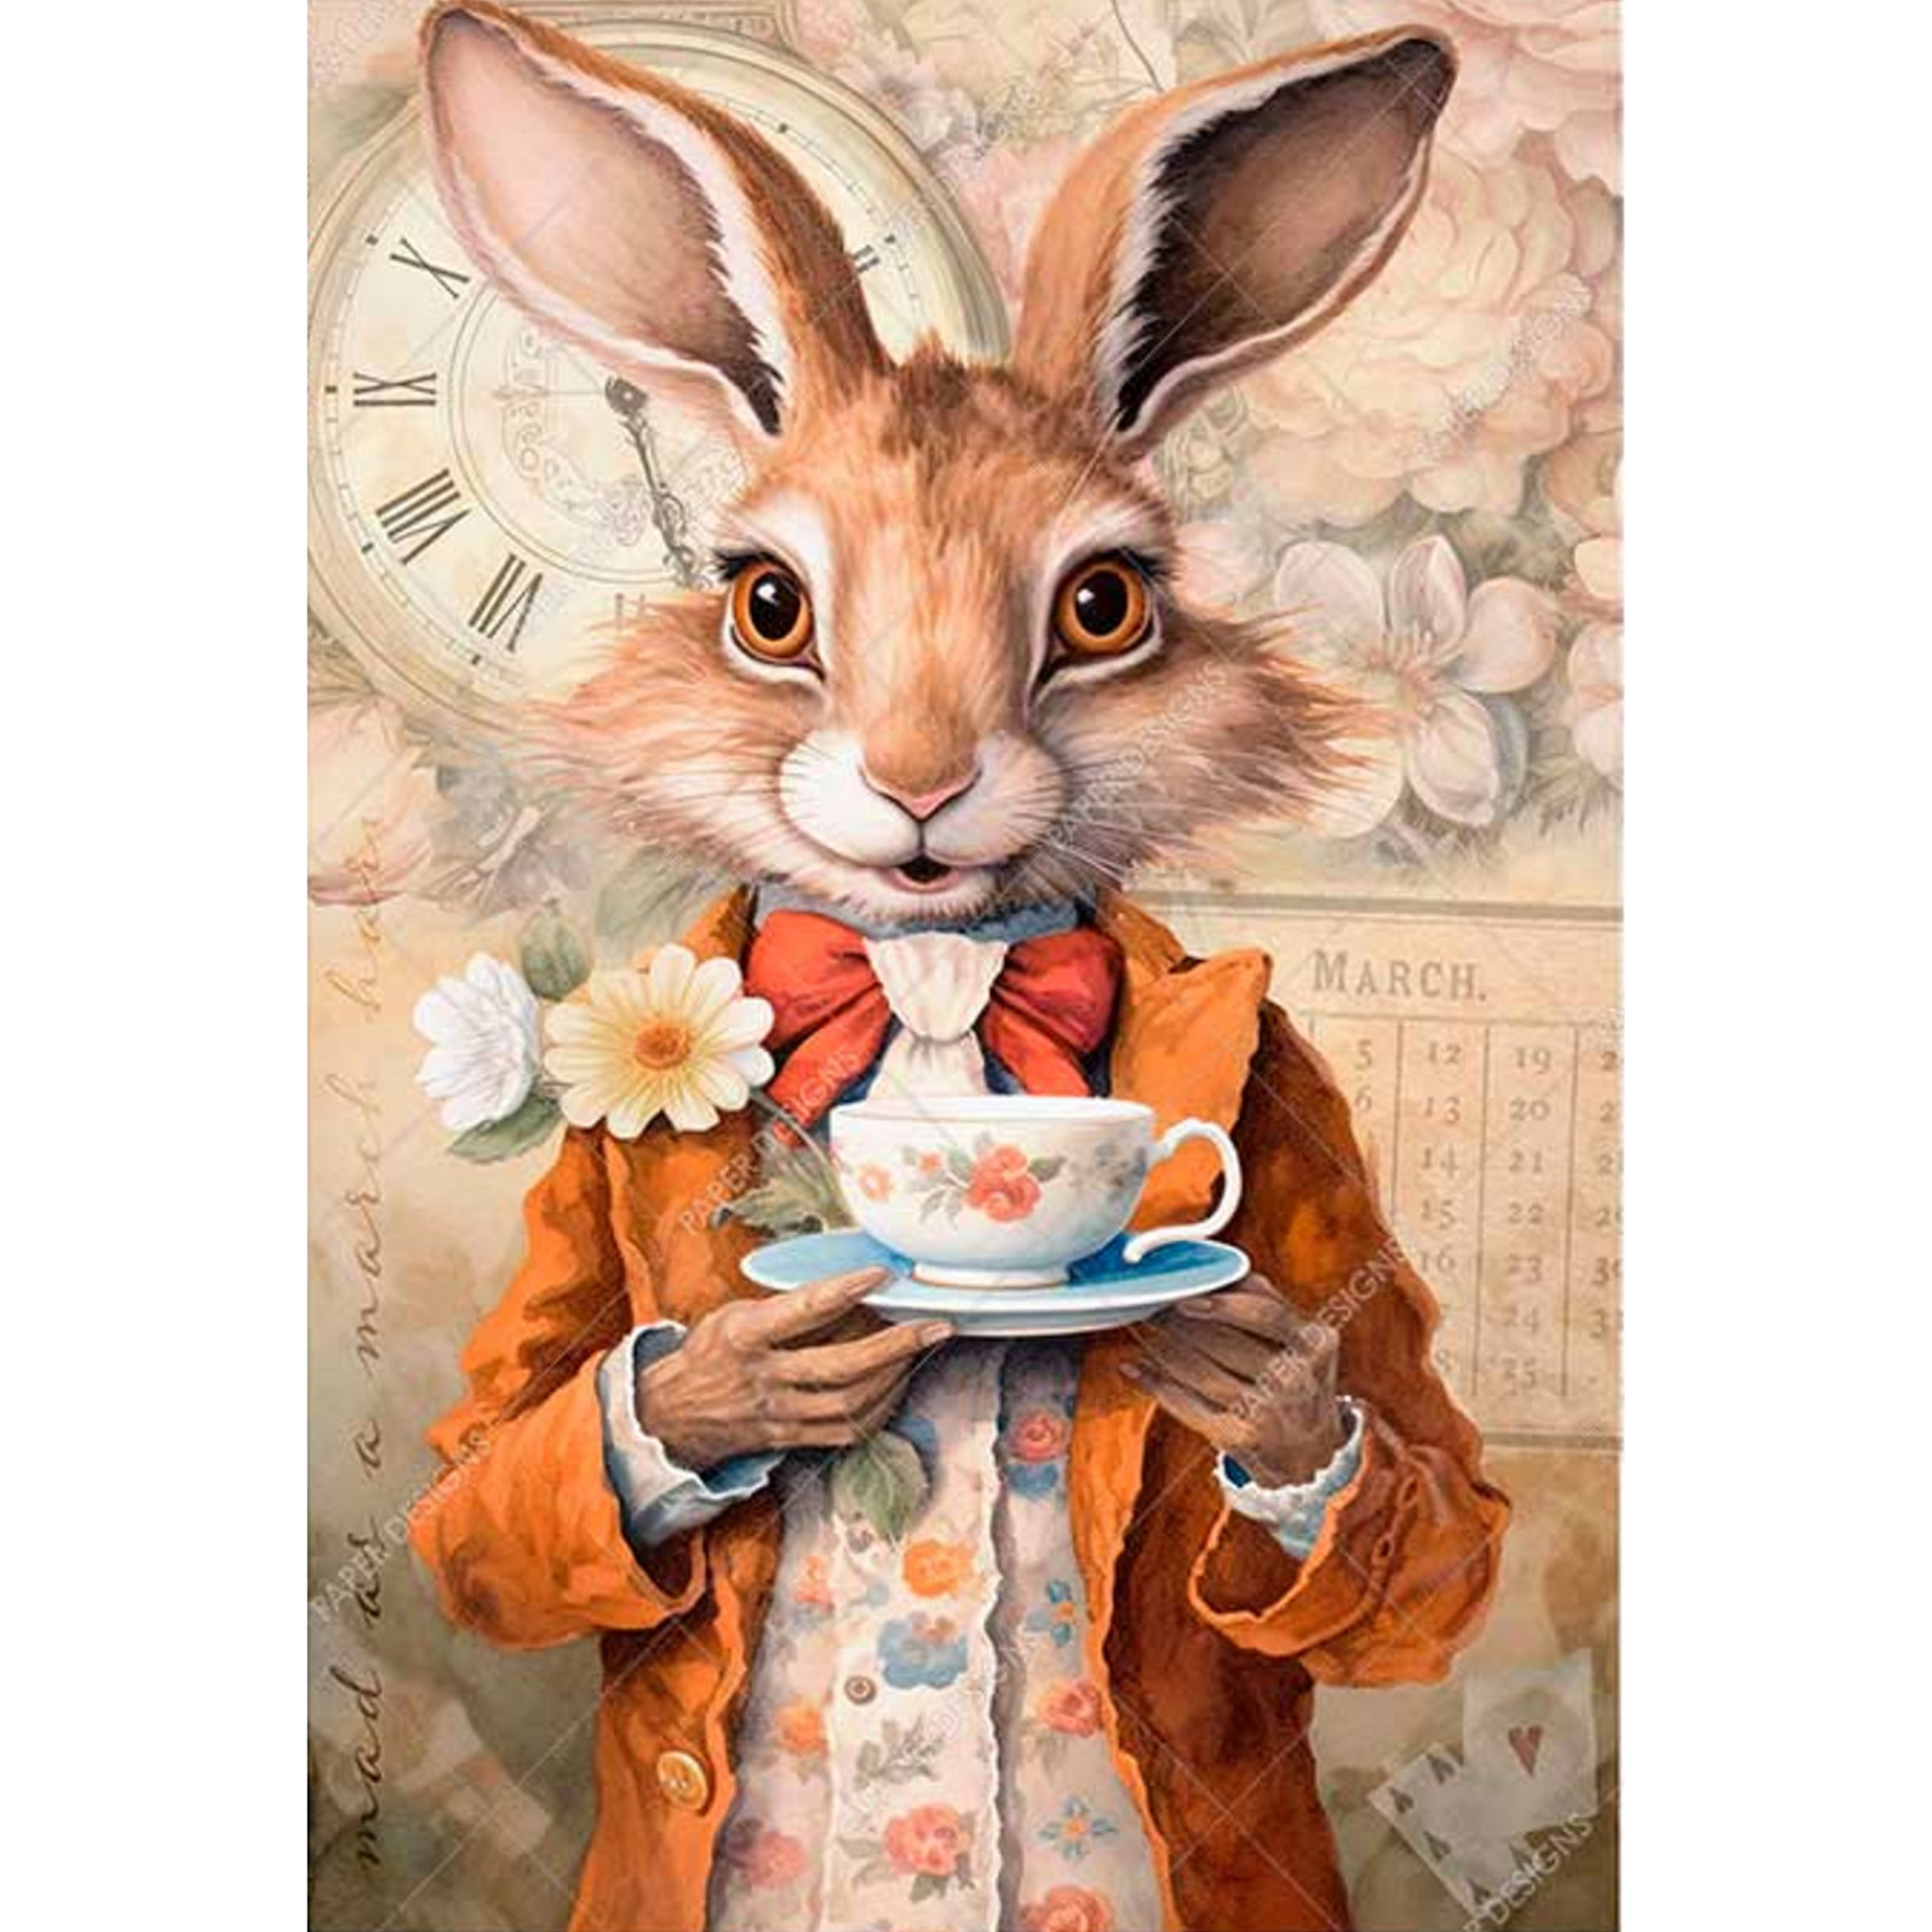 "Rabbit With His Tea" decoupage rice paper by Paper Designs. Available at Milton's Daughter.